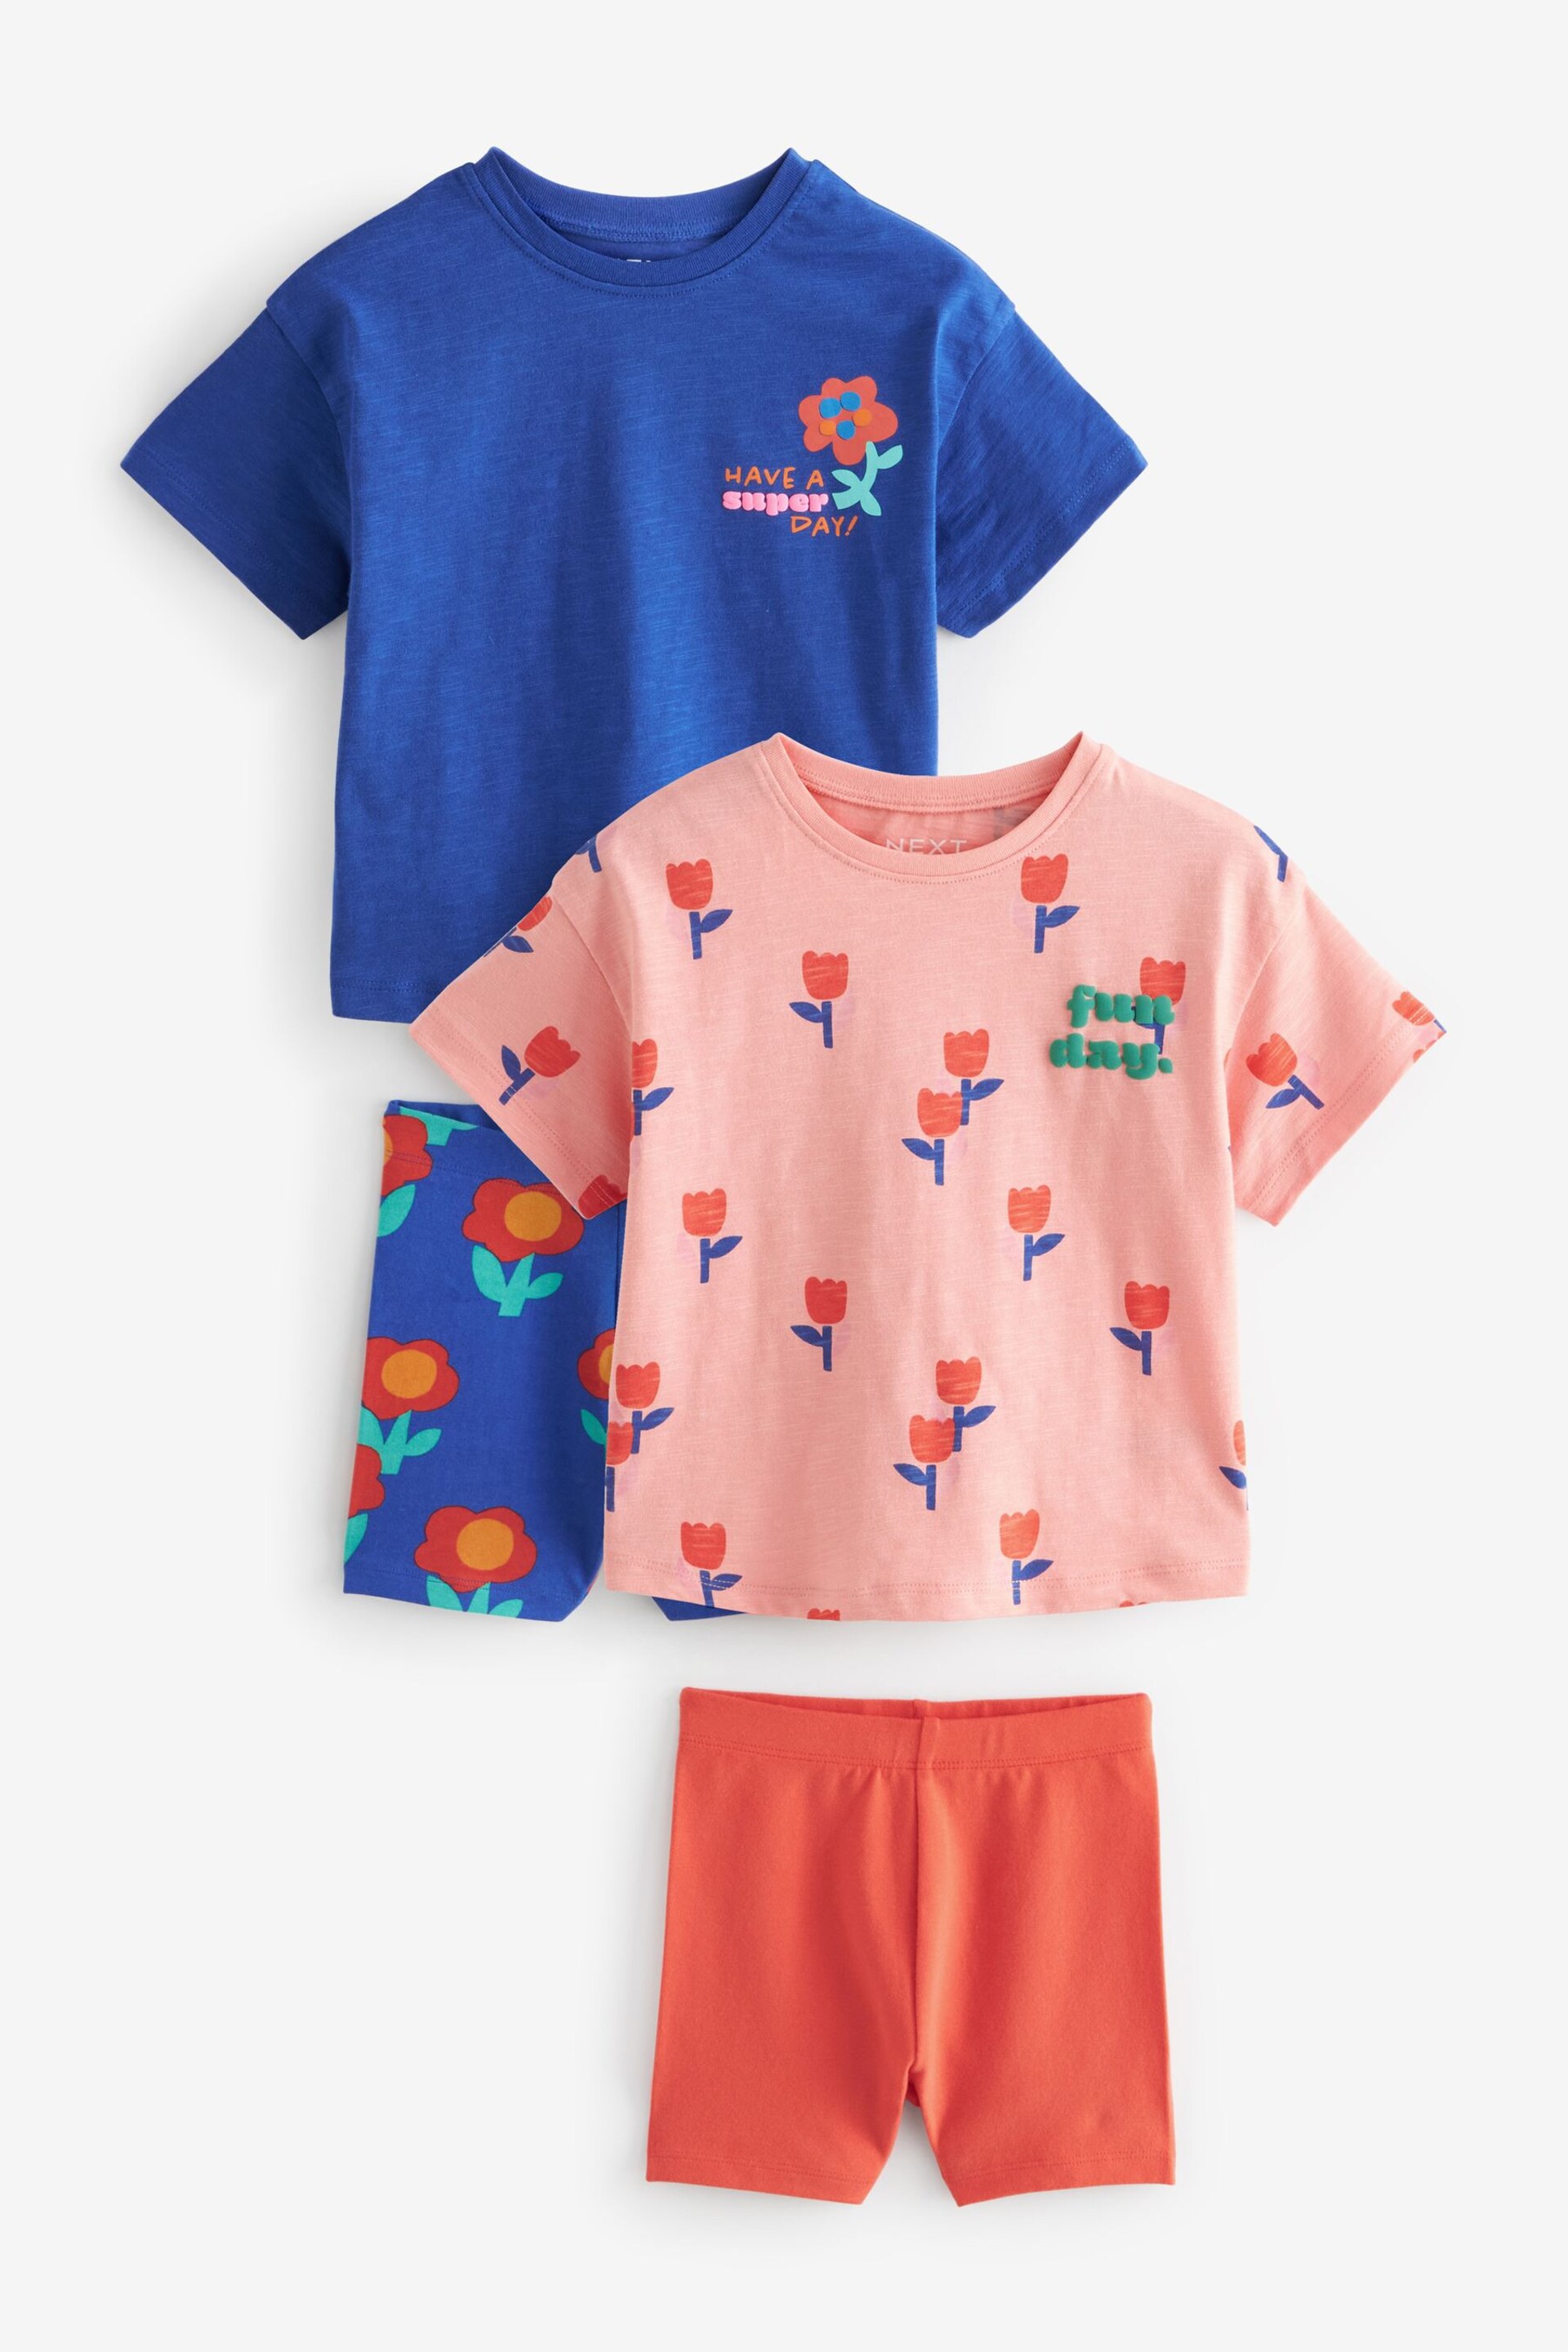 Blue Pink Flower T-Shirt and Shorts 4 Piece Set (3mths-7yrs) - Image 1 of 6